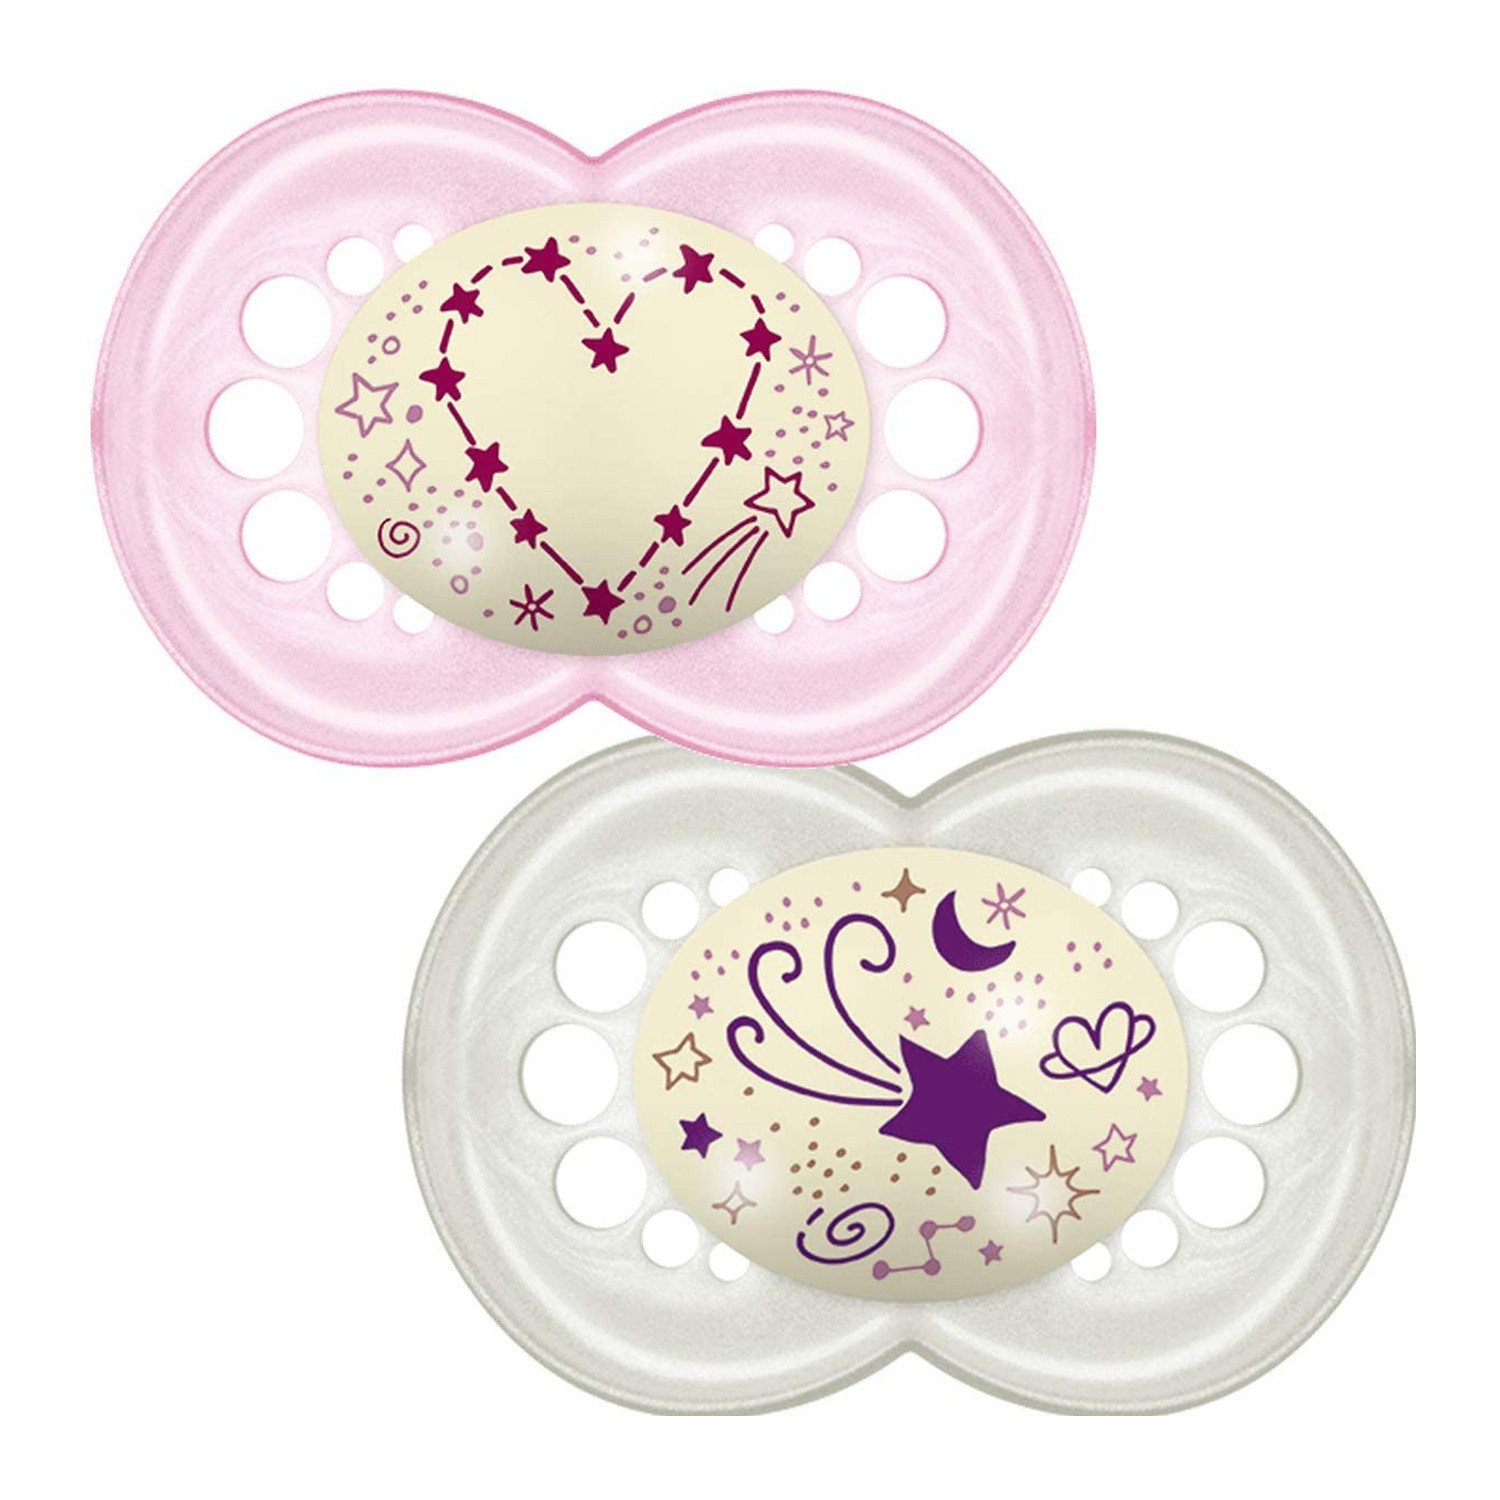 MAM Night Soother - 6m+ - Pink - Twin Pack Pink Unisex